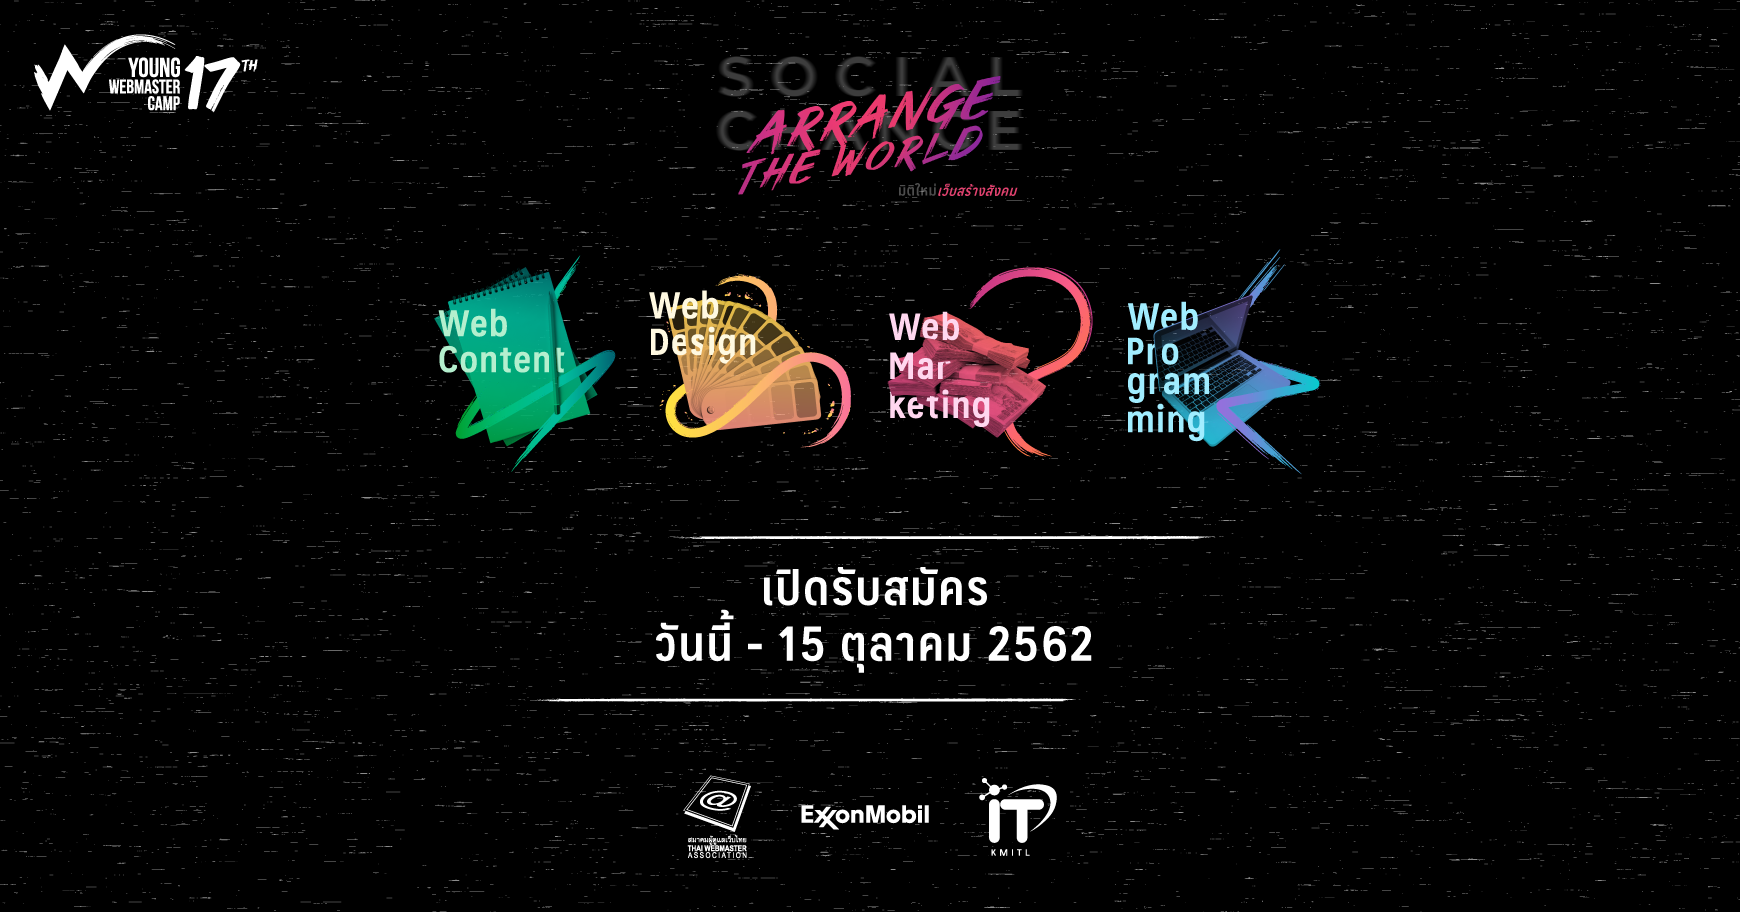 Cover Image for Young Webmaster Camp ครั้งที่ 17 “Social Change, Arrange The World”